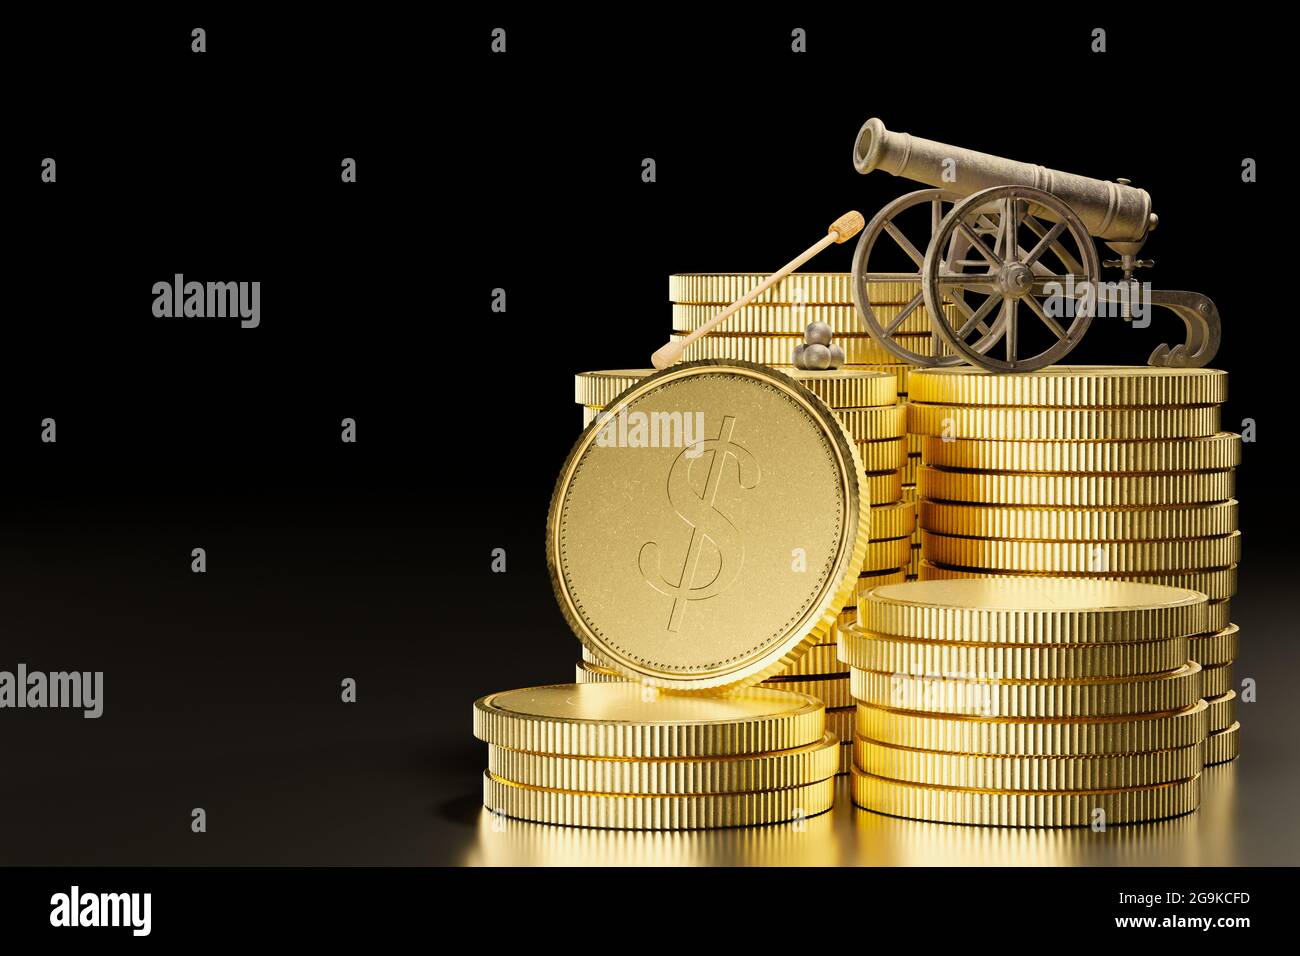 The rusty old cannon had cannonballs placed beside it and was set on top of stacked gold coins in a dark black background. The concept of attacking bu Stock Photo